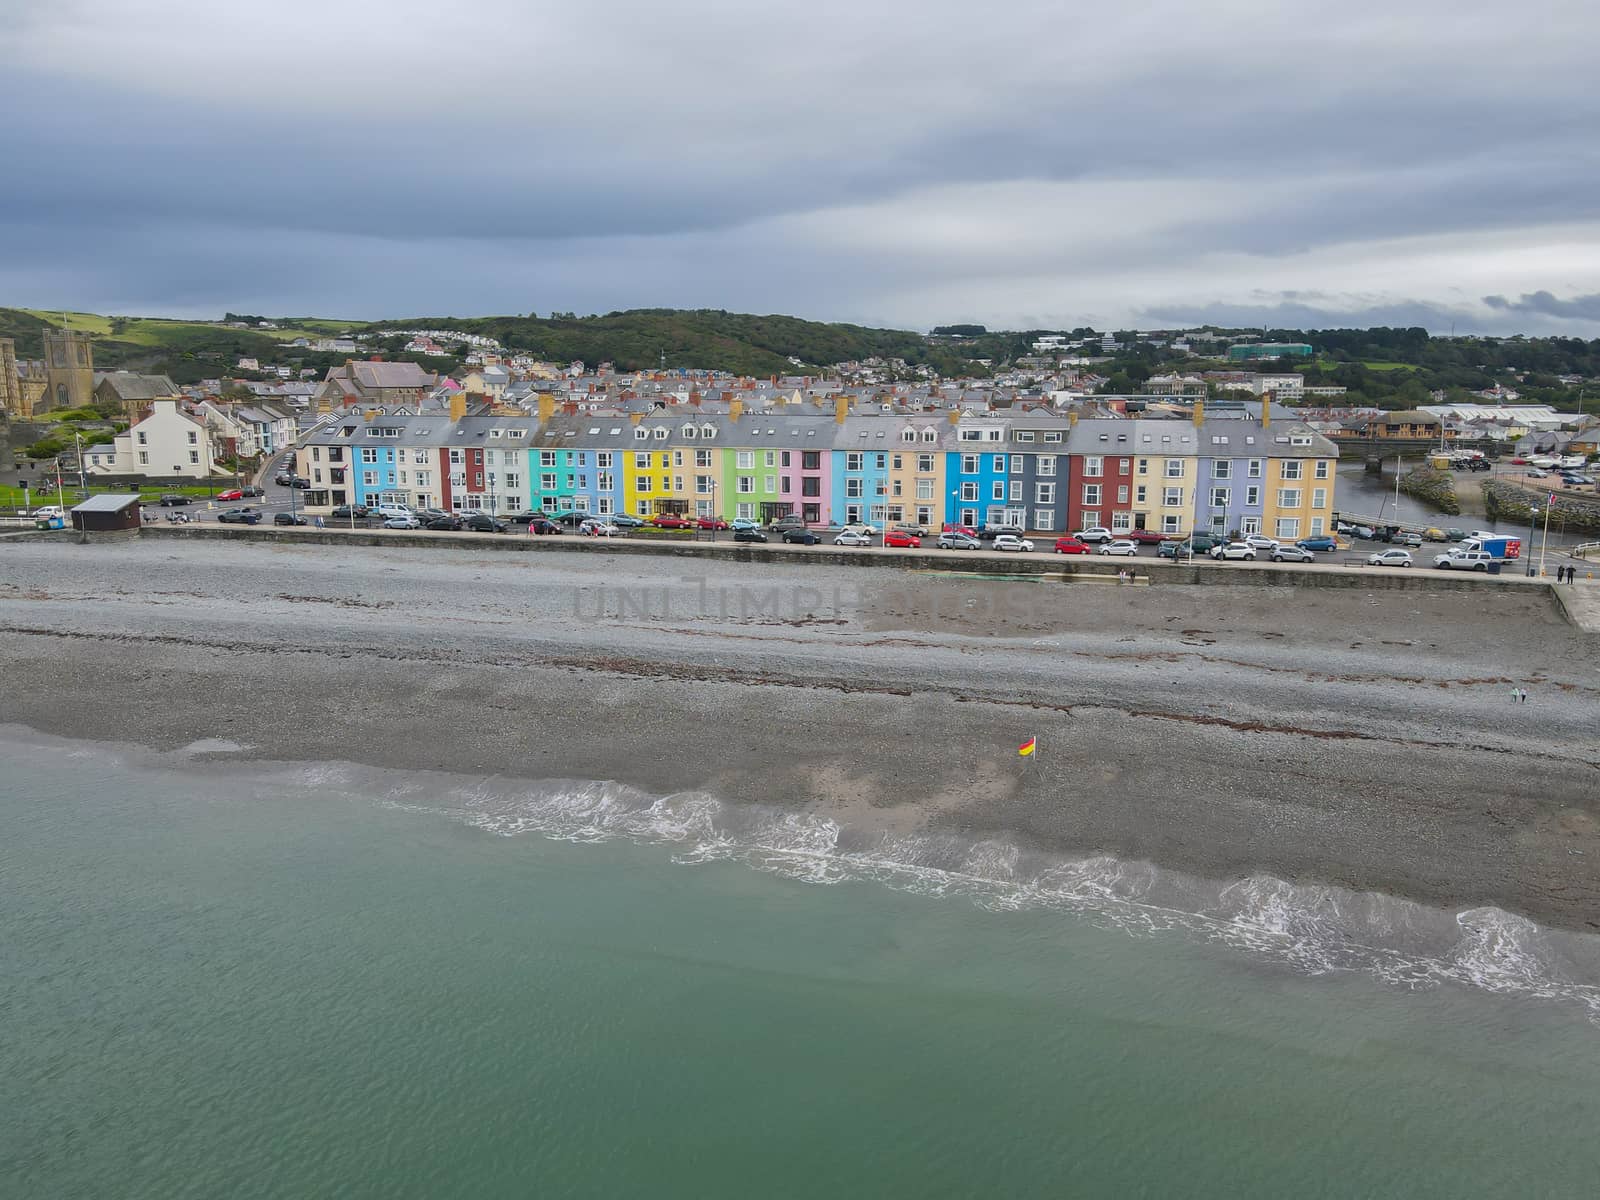 Colourfull Homes On The Welsh Coast Overlooking The Sea by WCLUK